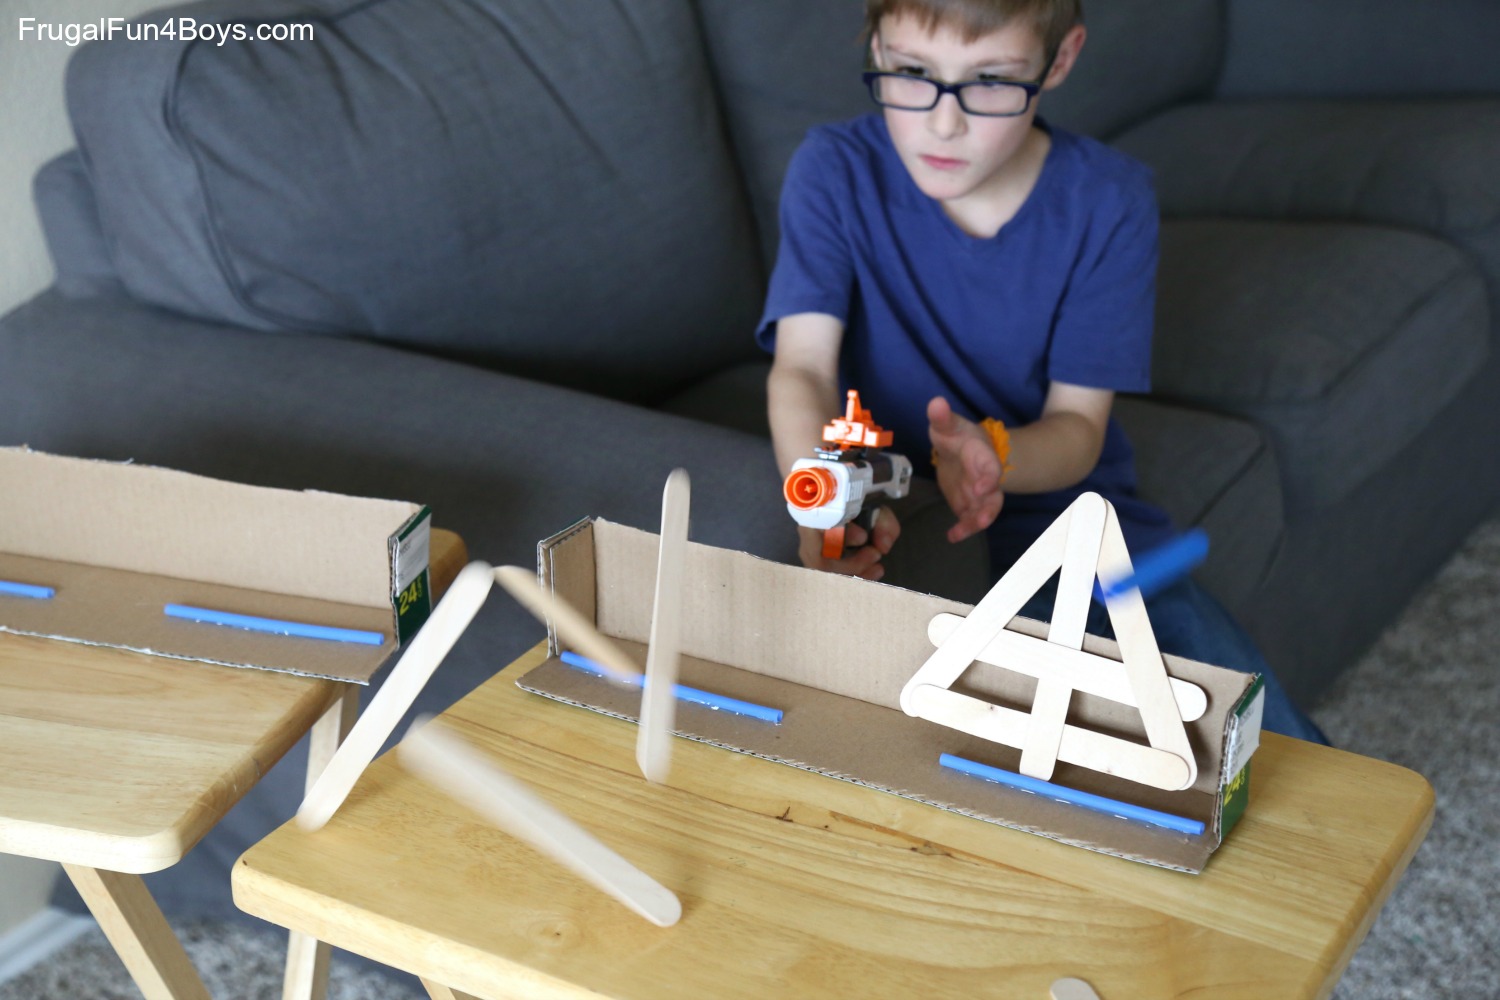 Super Awesome Nerf Games to Make